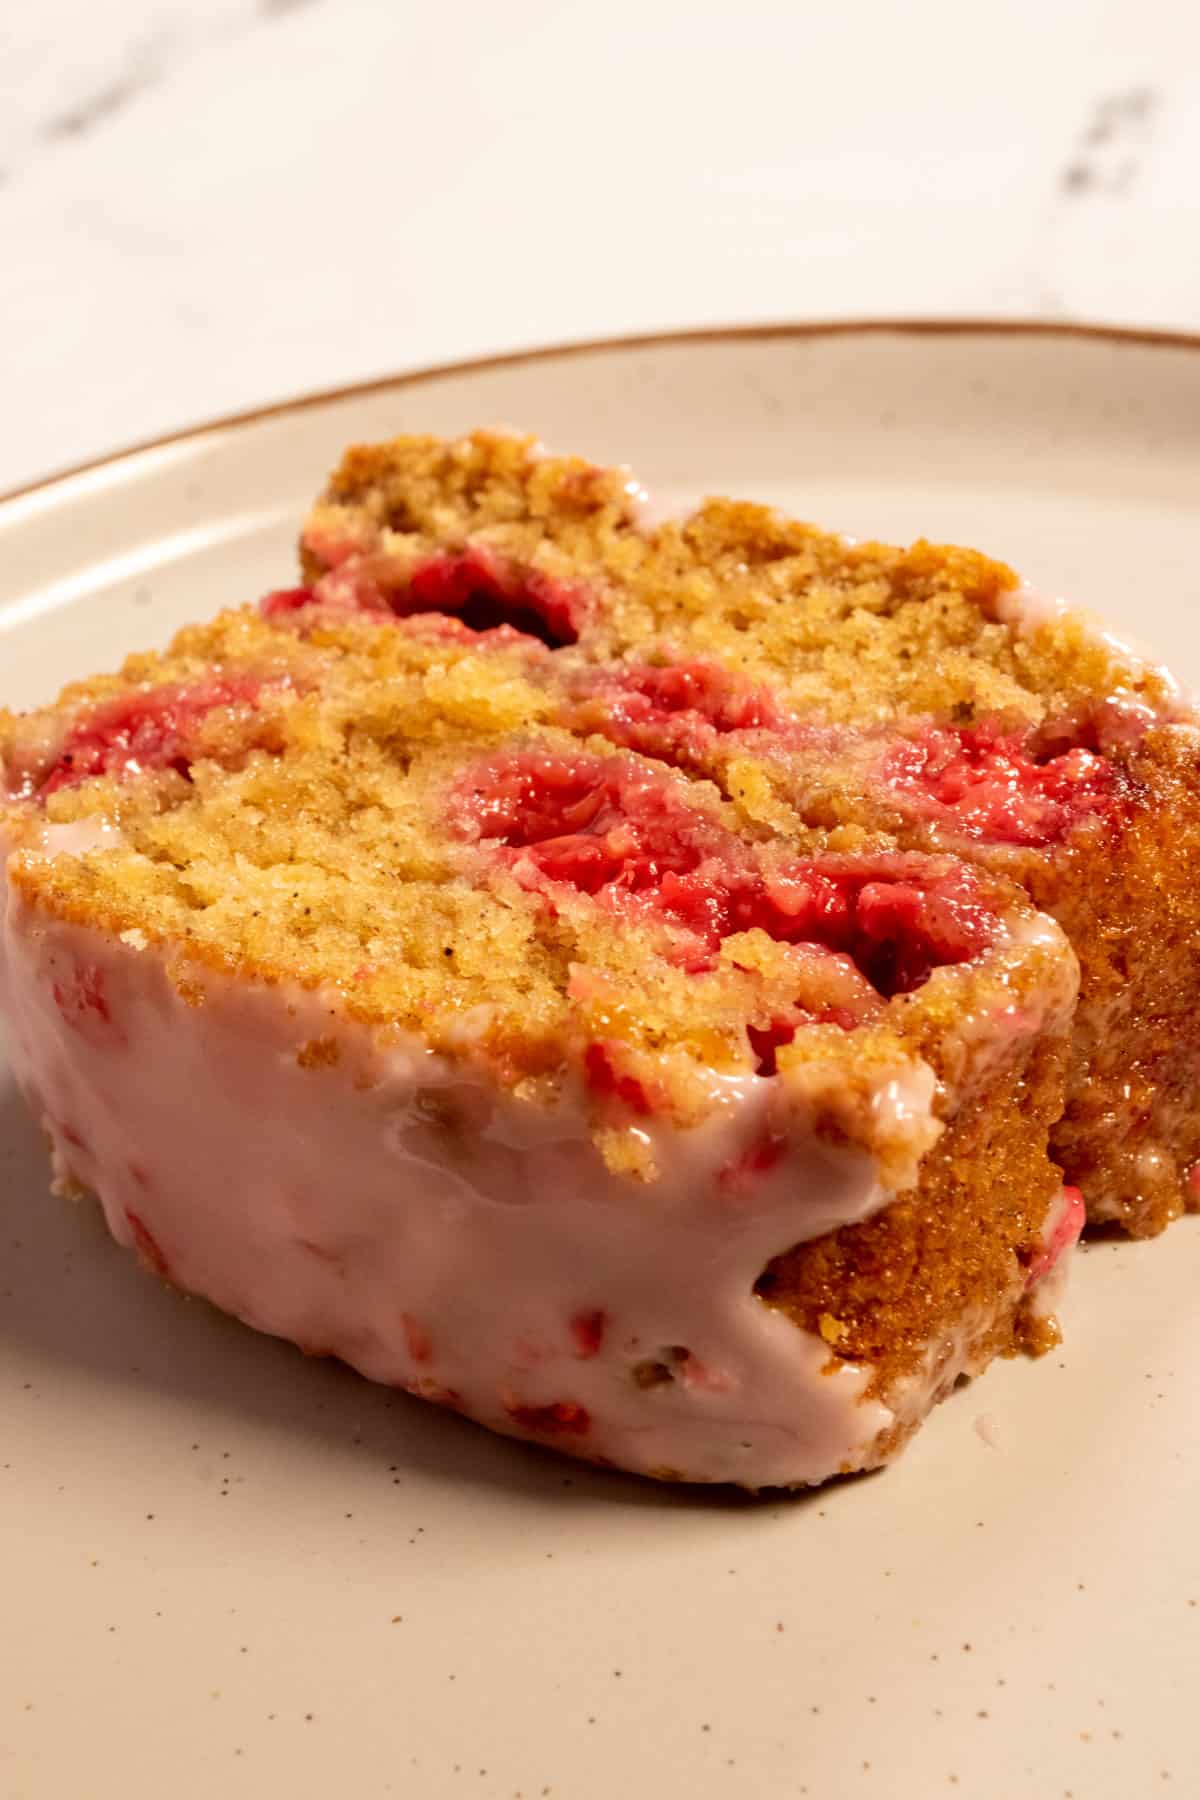 A golden, thick slice of raspberry cake which is filled with juicy raspberries. 